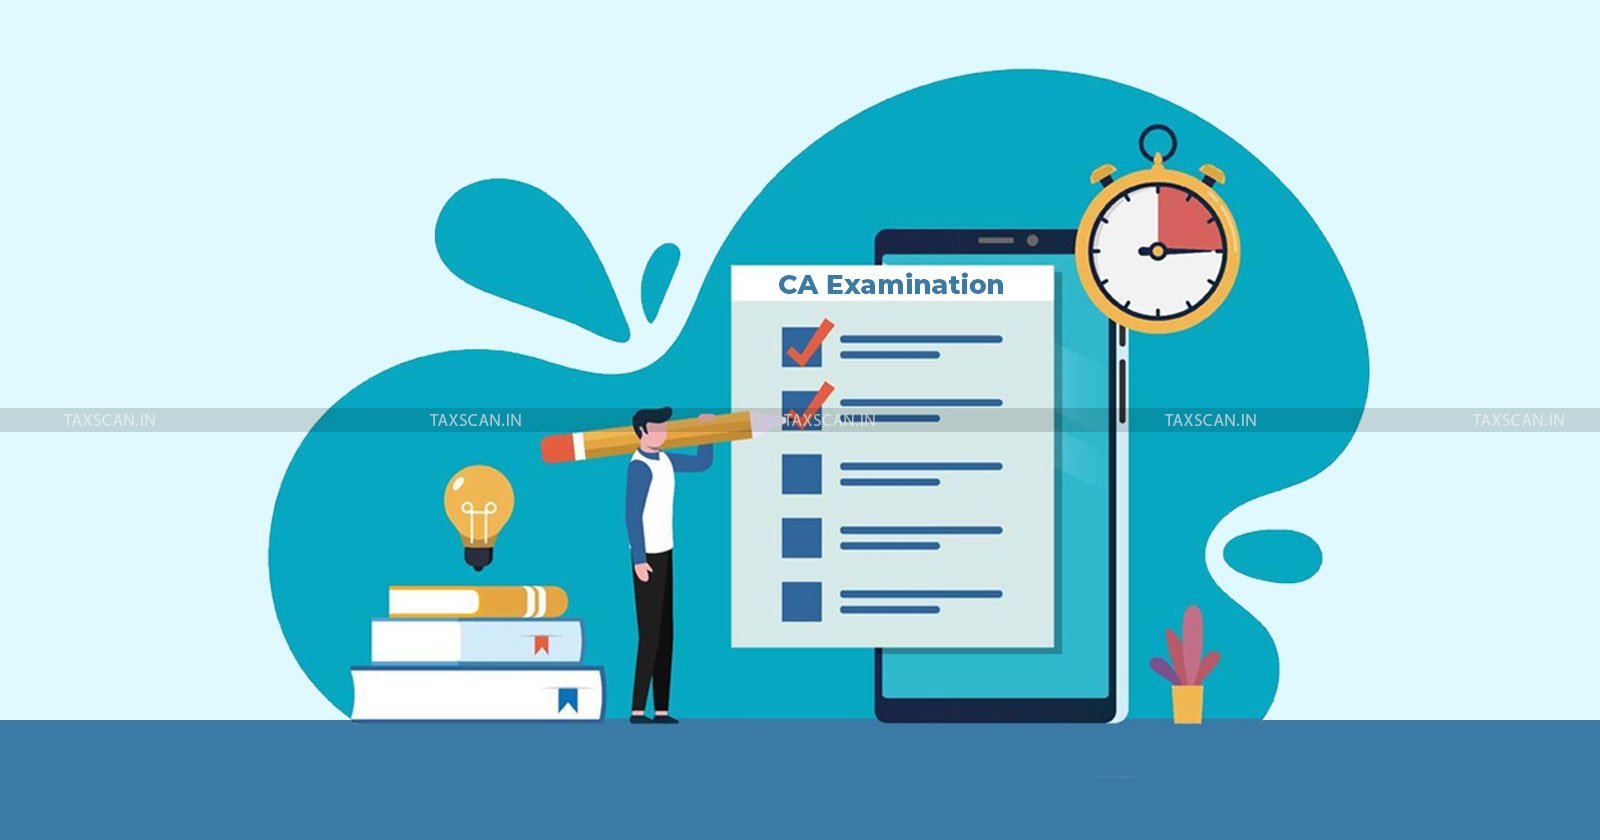 CA Examination - ICAI - Students - Intermediate and Final level - appearing in November - CA Exam - Exams - CA - November 2023 CA Examination - Chartered Accountants - taxscan